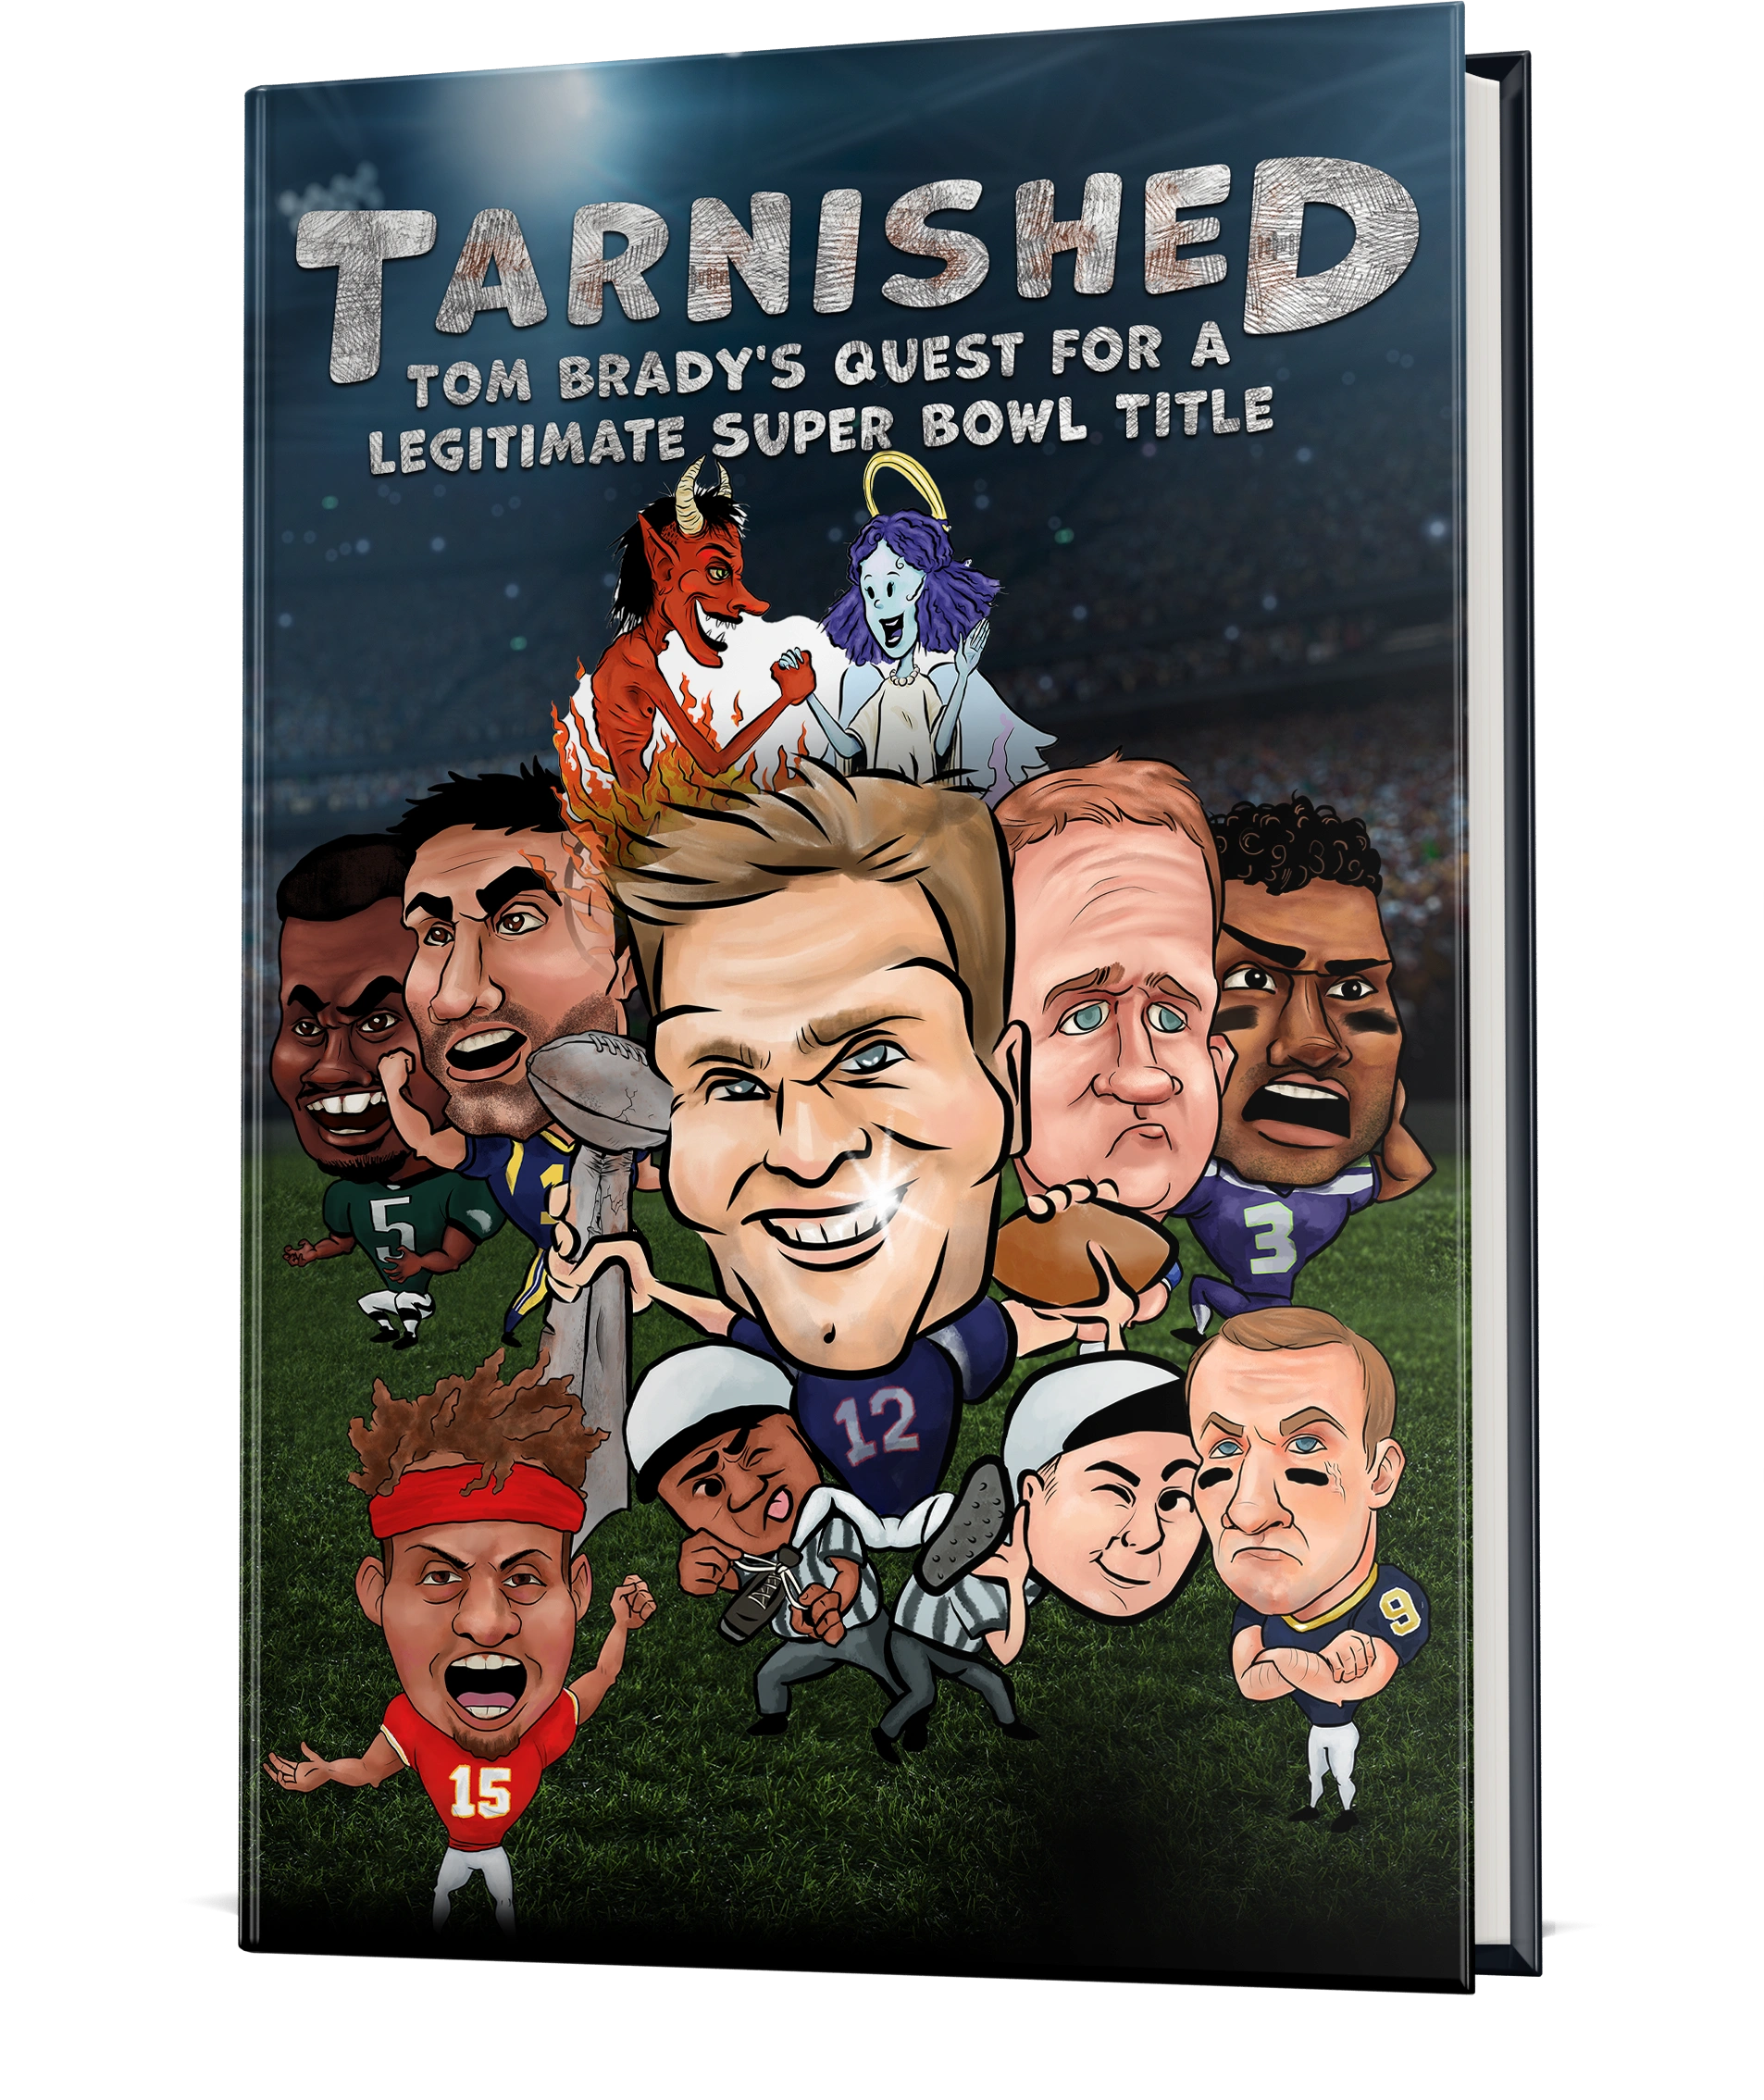 Tarnished is an illustrated sports book about Tom Brady's seven NFL Super Bowl titles.